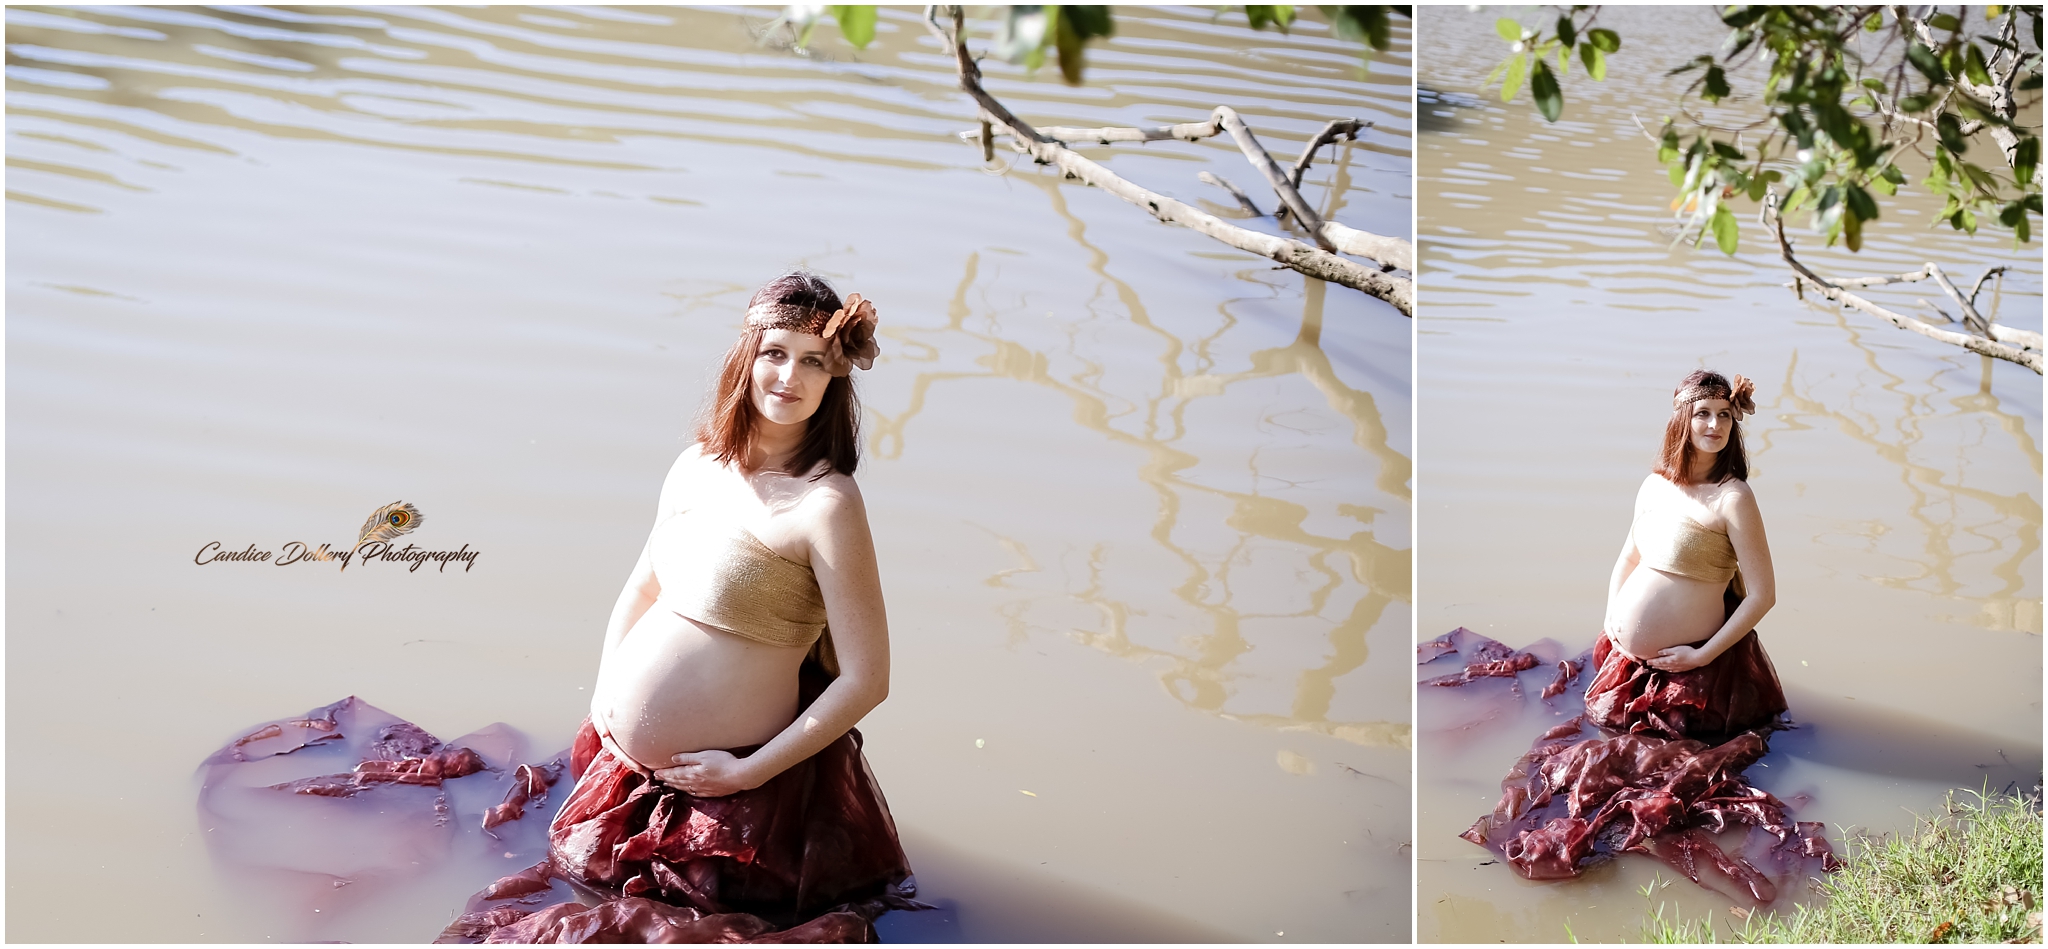 kirstys-maternity-candice-dollery-photography_1798